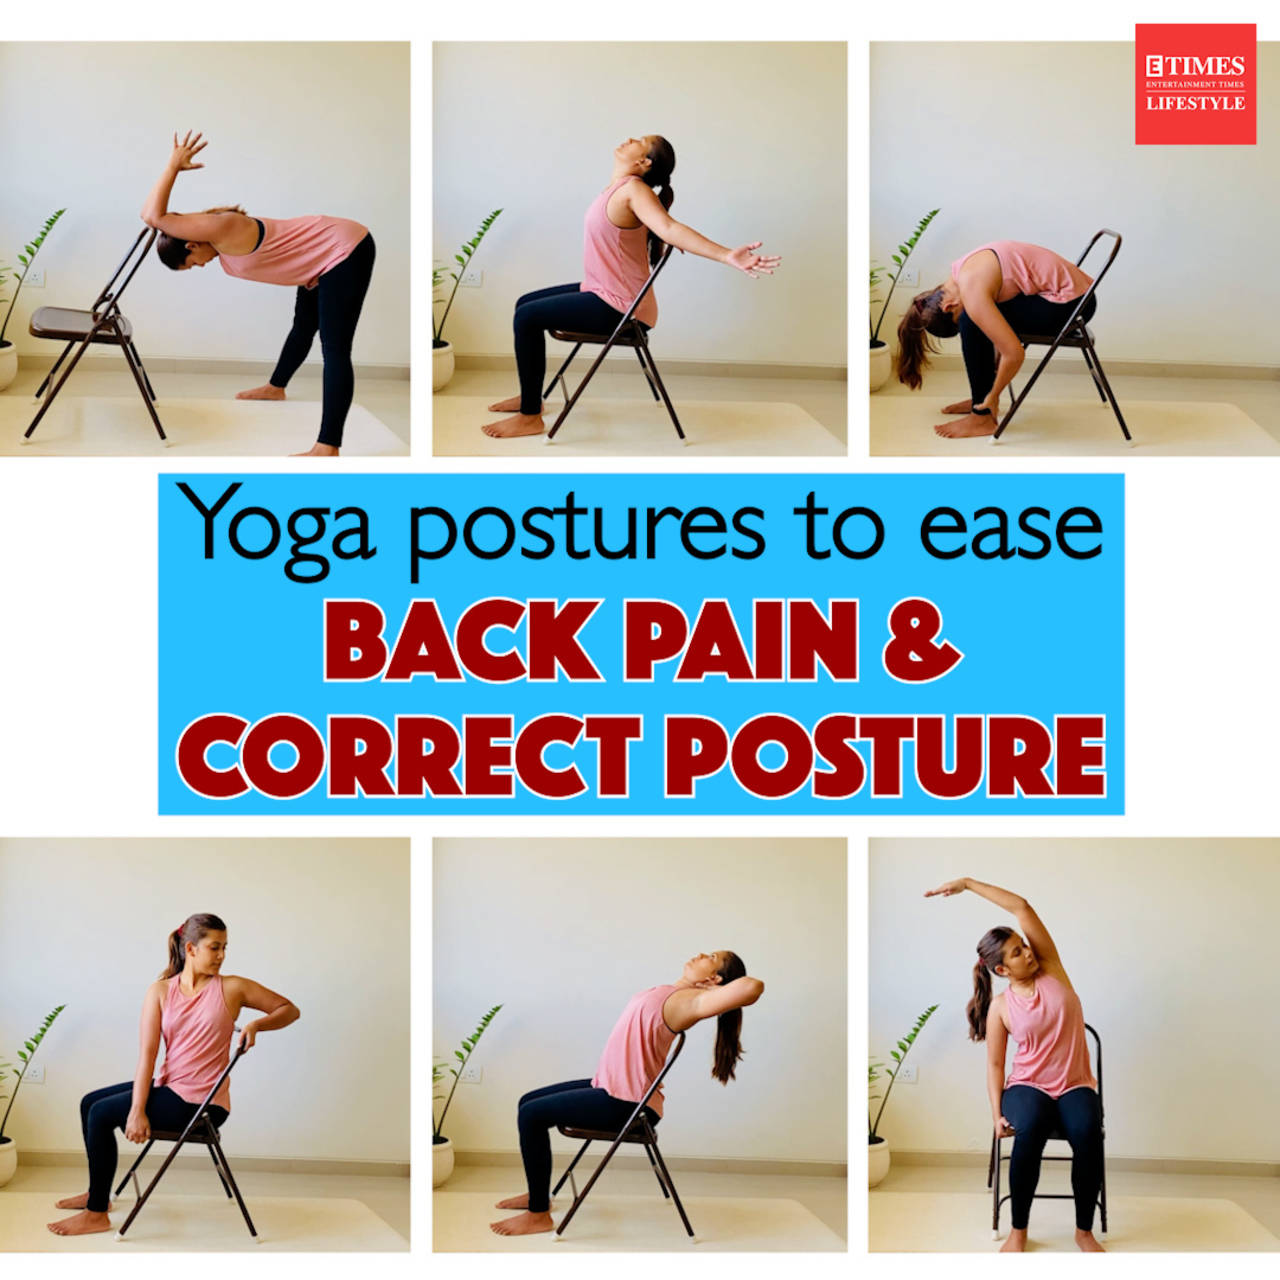 Yoga poses for better posture